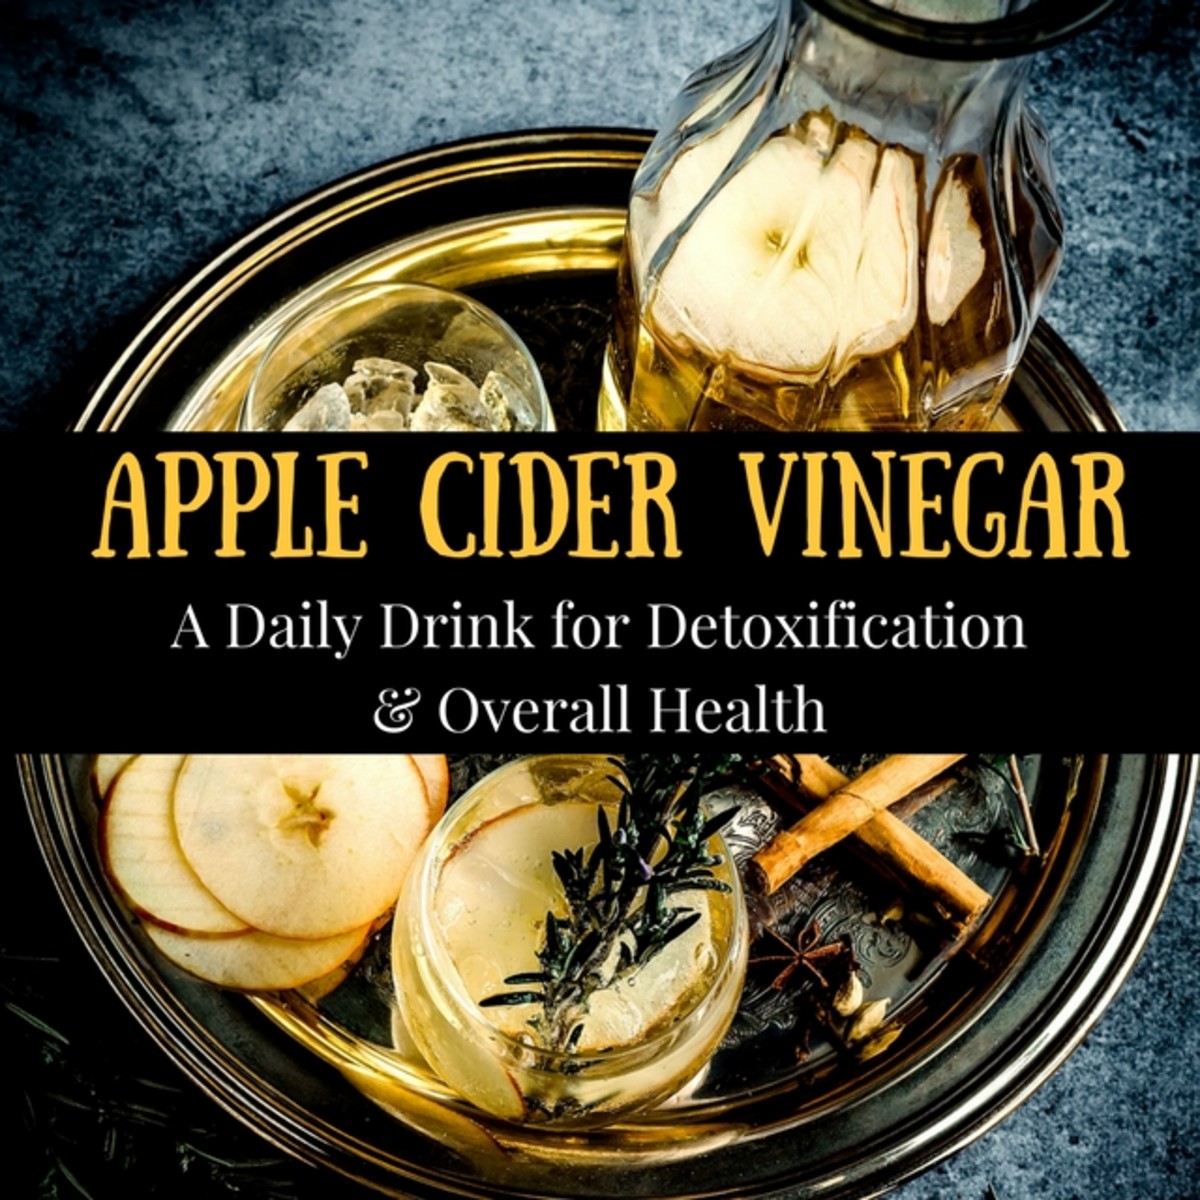 apple-cider-vinegar-a-daily-drink-for-detoxification-and-overall-health